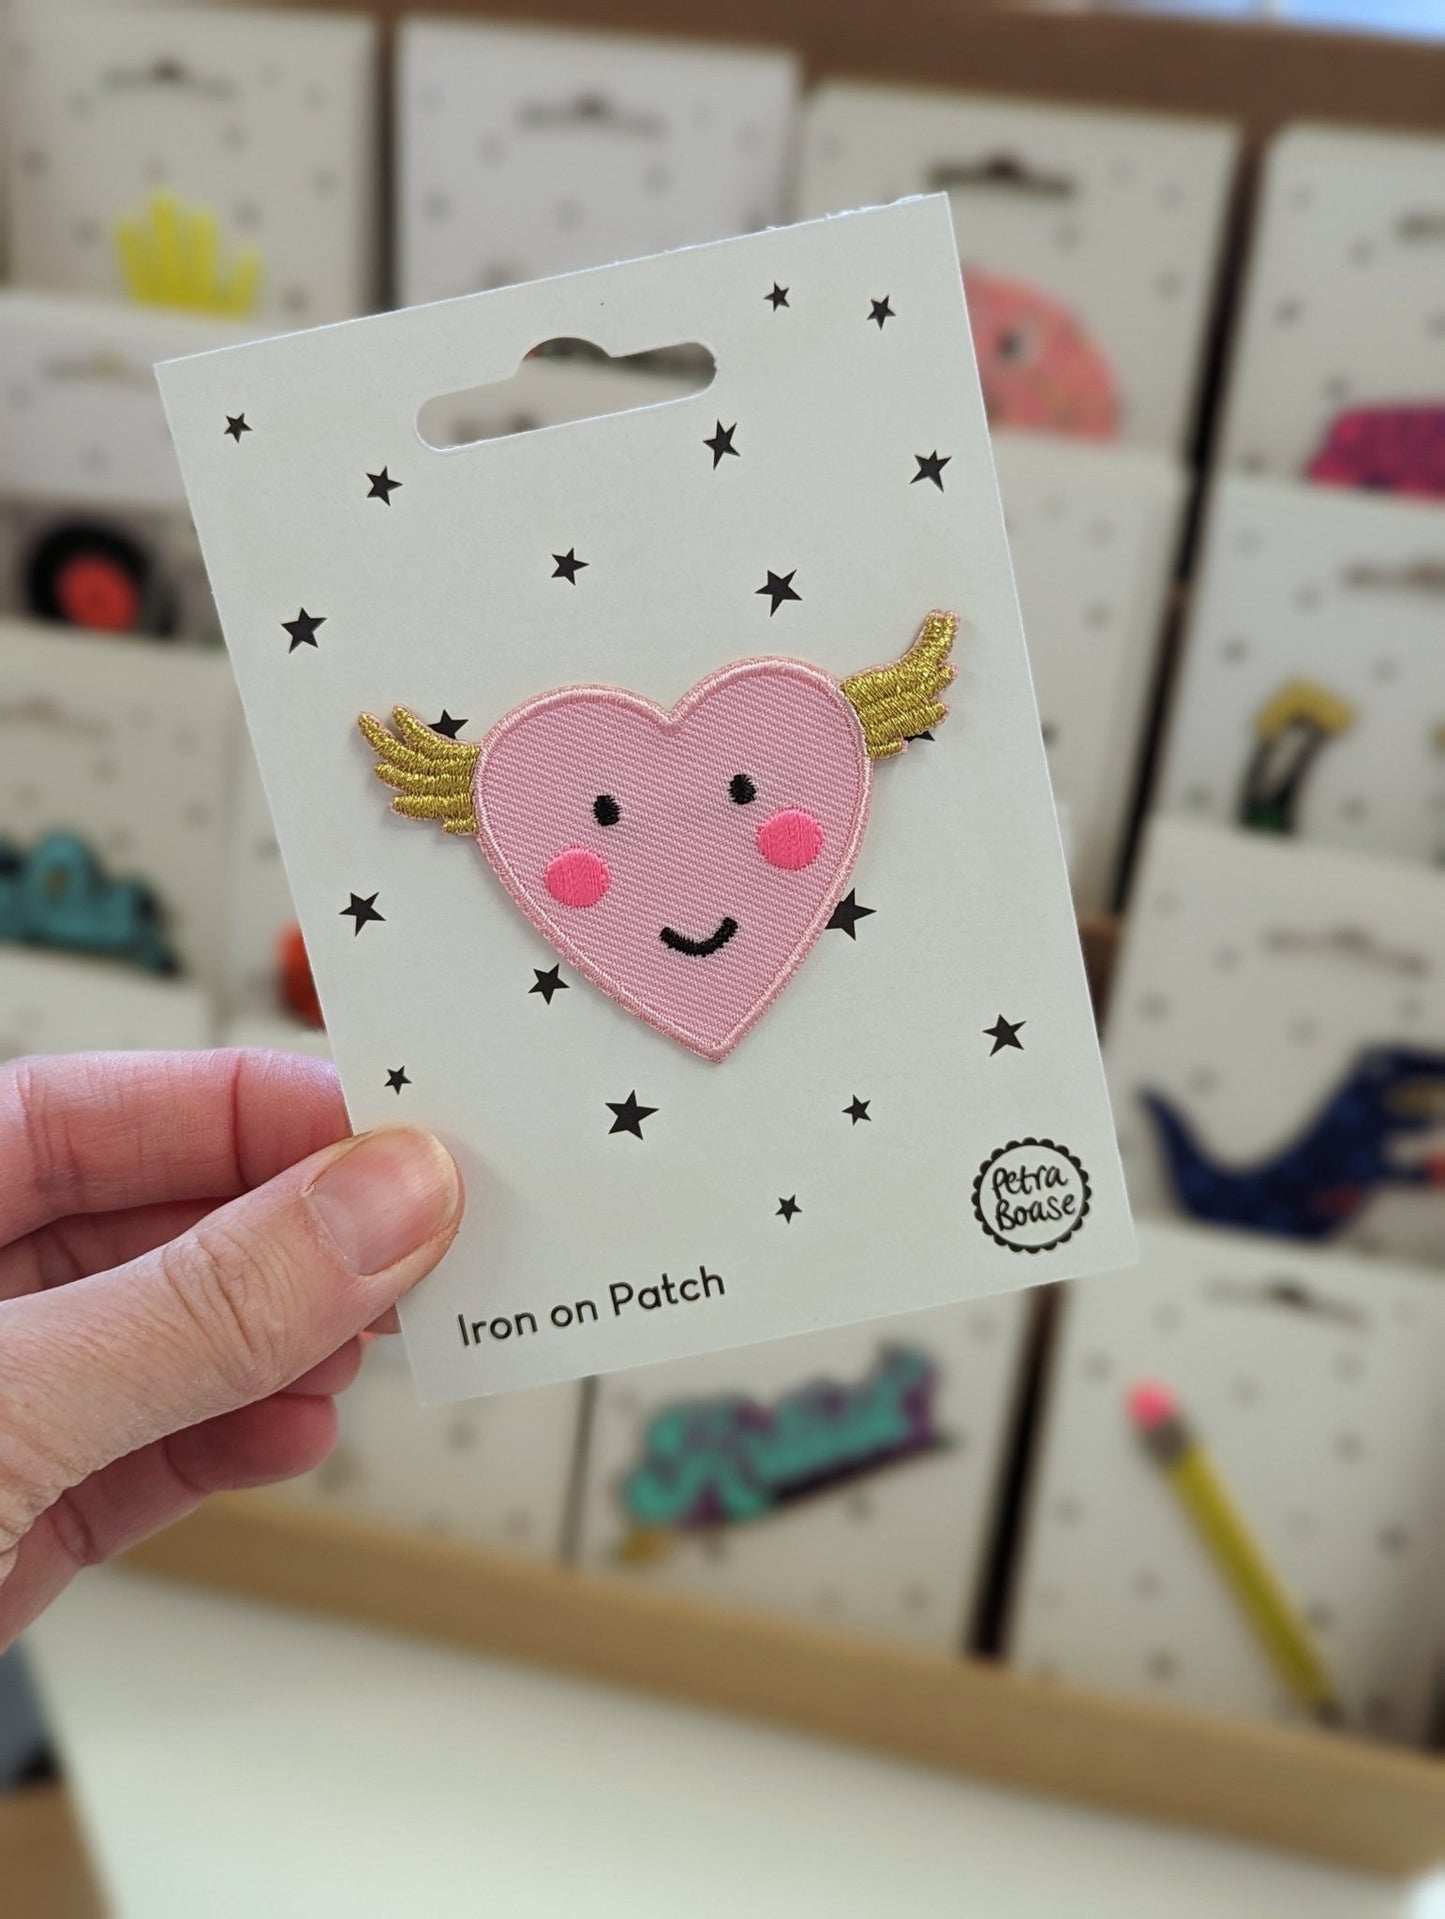 Iron on Patch - Winged Heart - The Stationery Cupboard